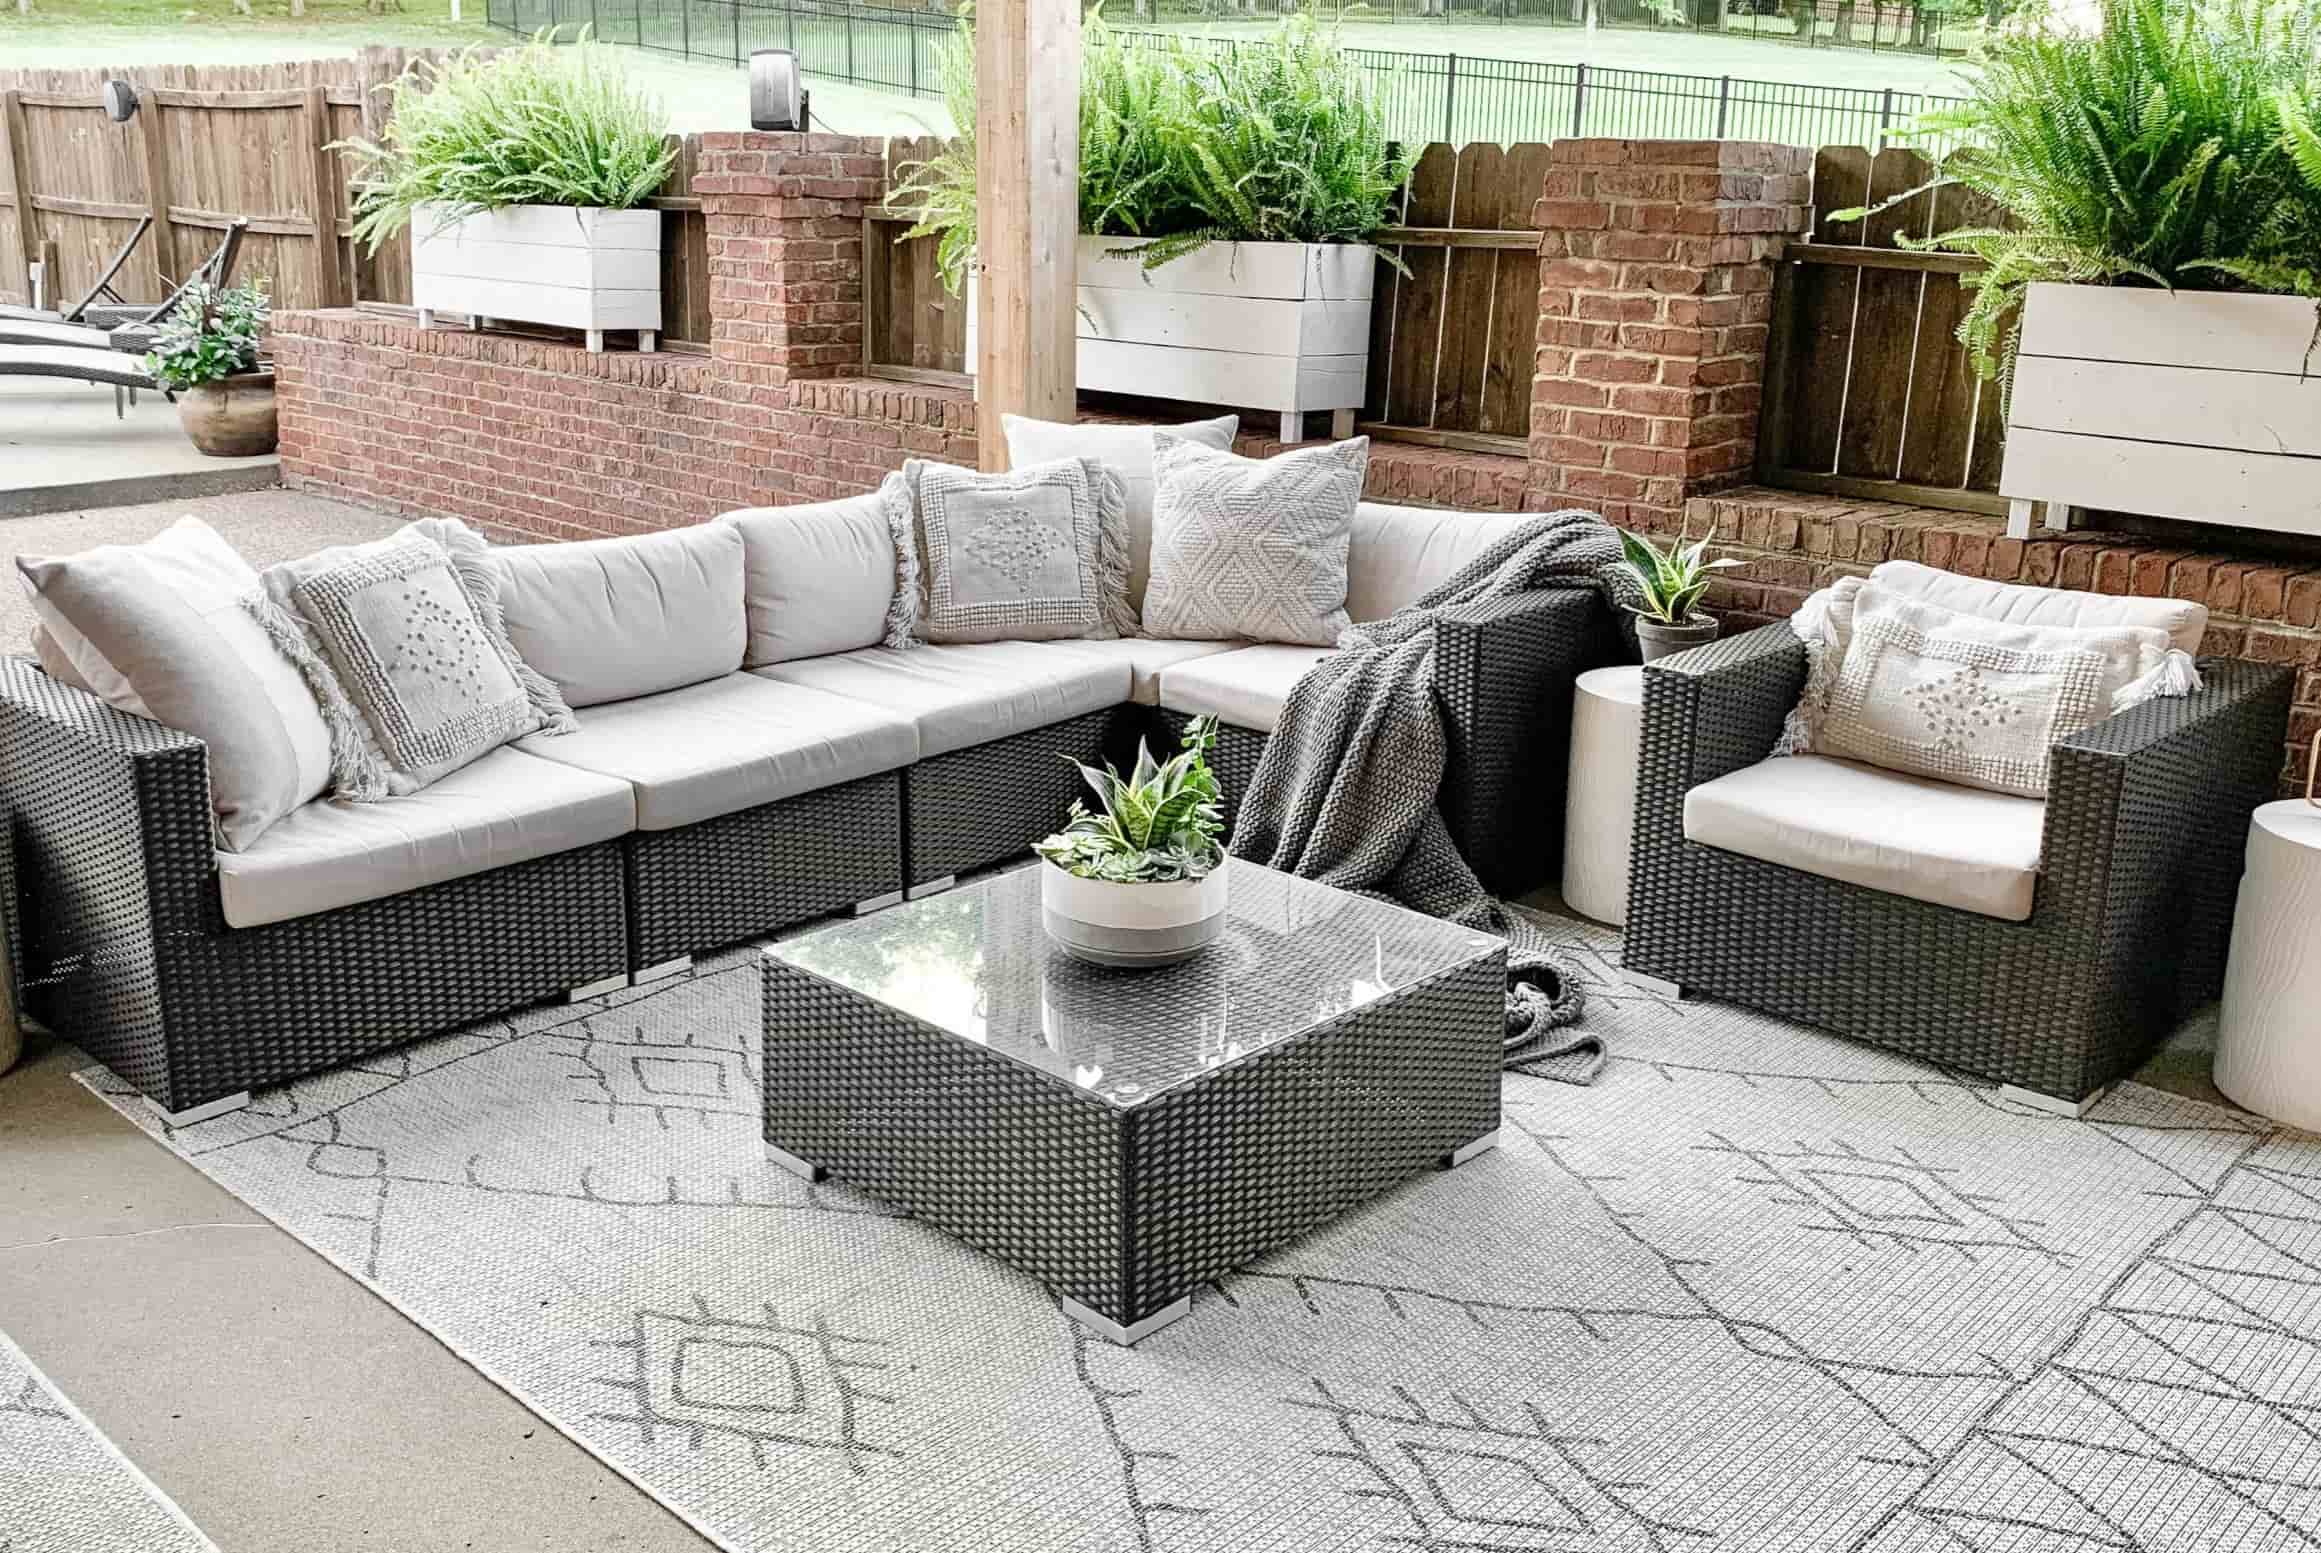 How To Keep Outdoor Rugs From Curling Up